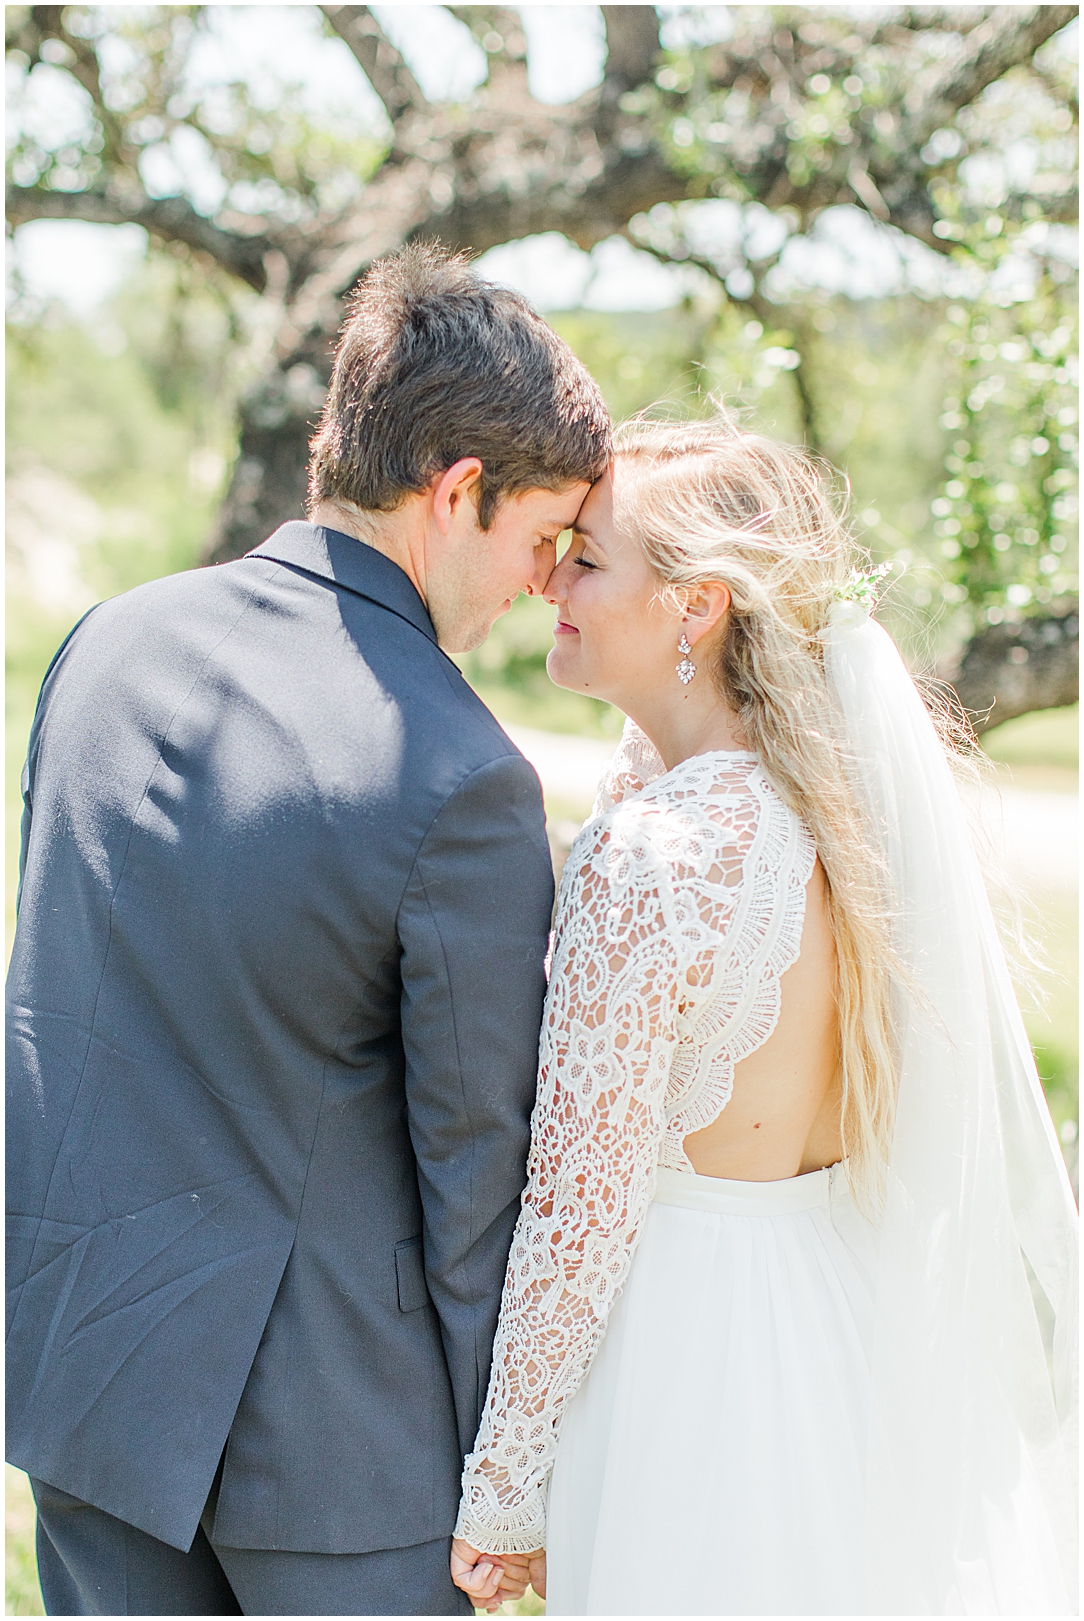 An Intimate elopement for two in Dripping Springs Texas by Allison Jeffers Photography 0065